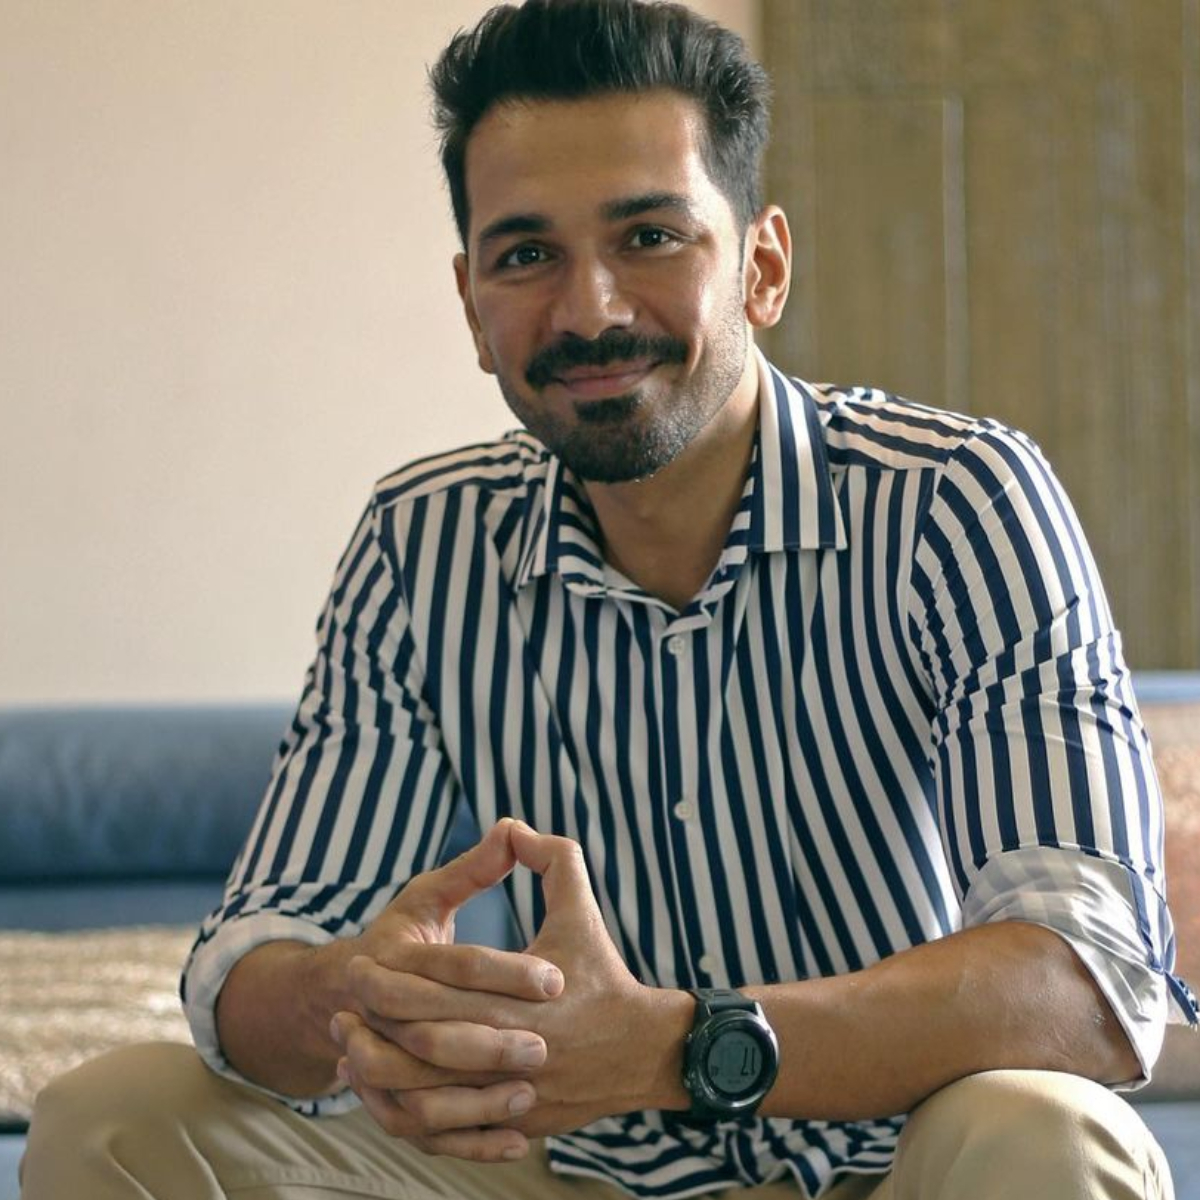 EXCLUSIVE: Rahul Vaidya did NOT deserve to be in the top 2, unfair to me & other contestants: Abhinav Shukla